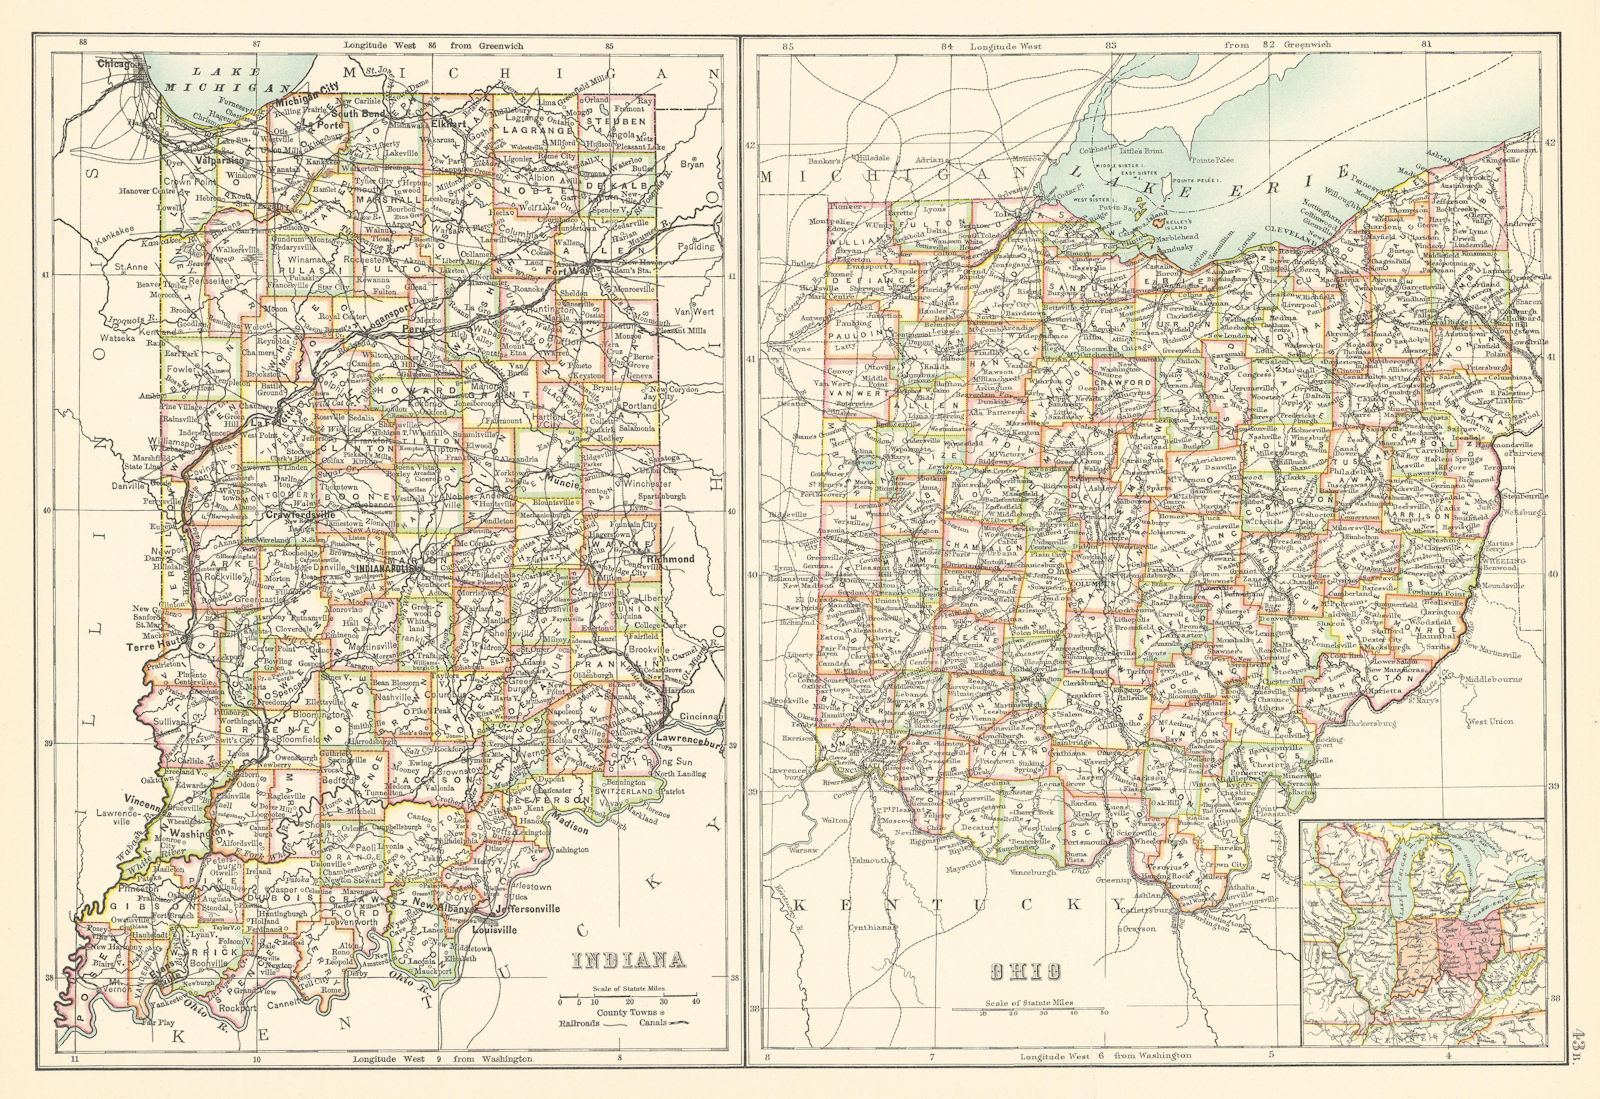 Associate Product Indiana and Ohio state maps showing counties. BARTHOLOMEW 1898 old antique